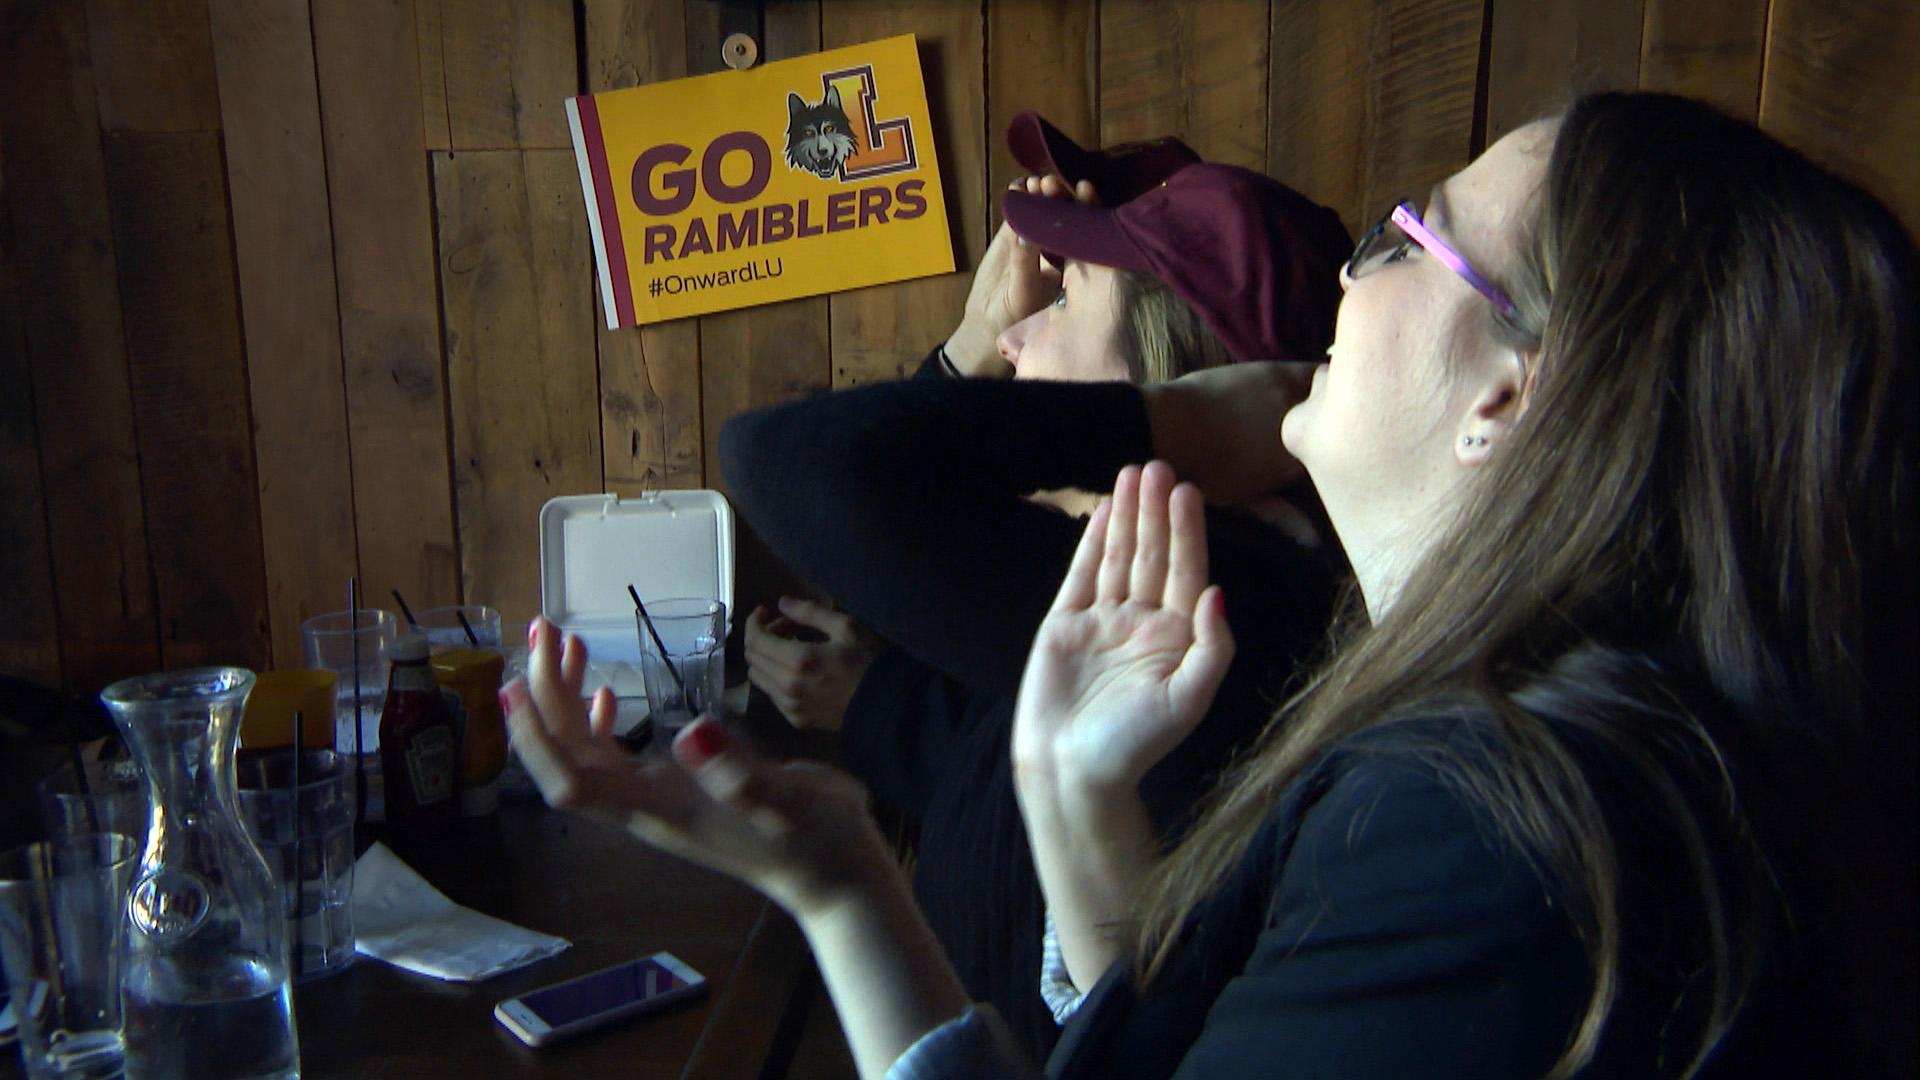 Loyola Ramblers fans cheer on the team at in Rogers Park bar Bruno’s on Thursday, March 15, 2018. (WTTW News)